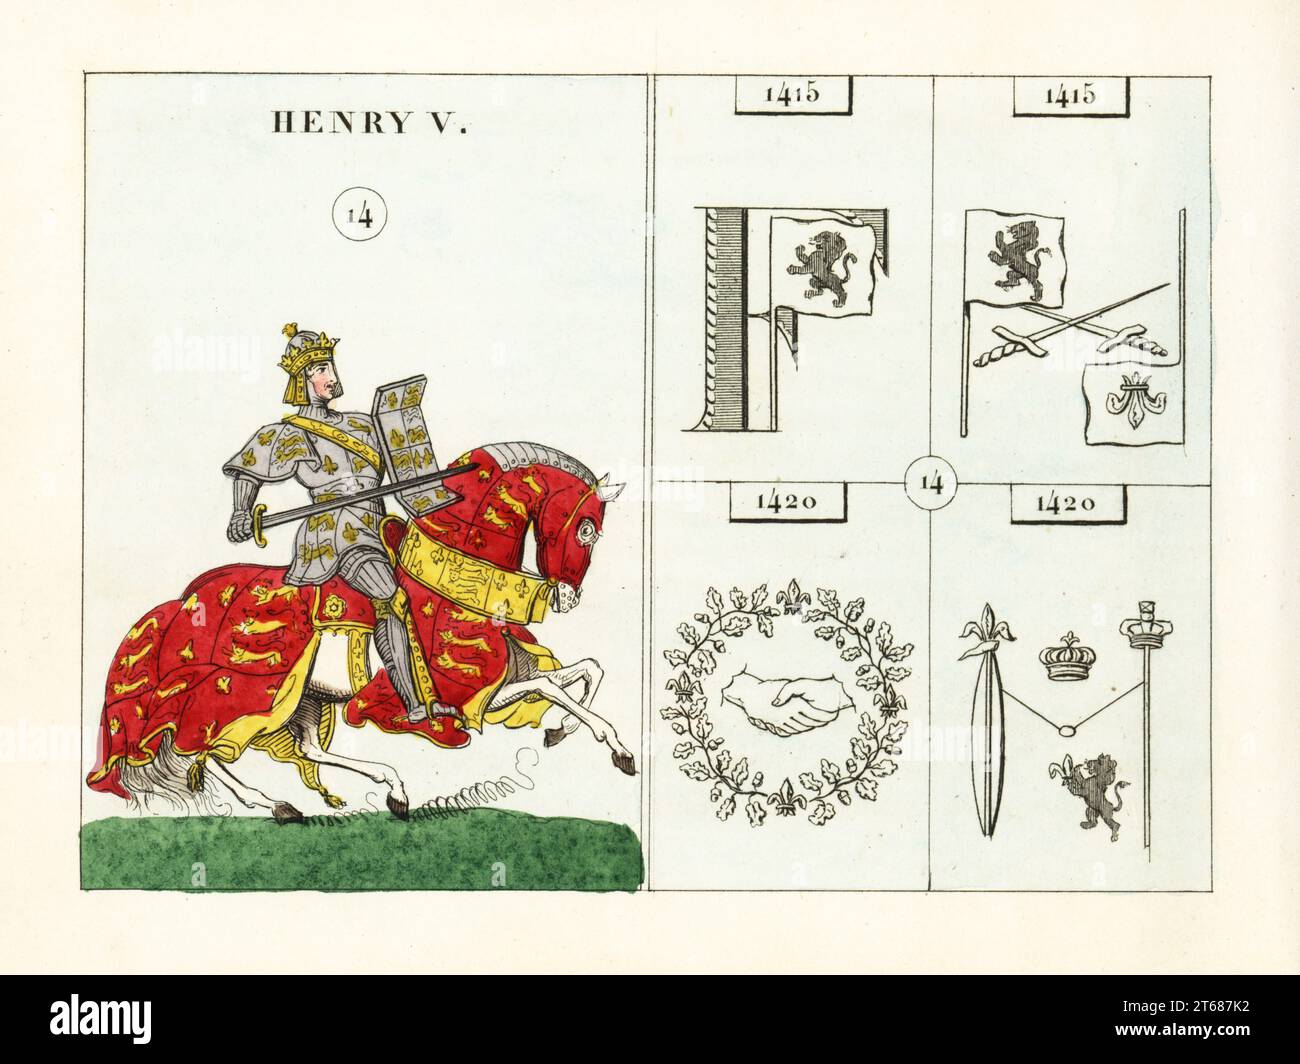 Portrait of King Henry V of England, Henry of Monmouth. With suit of armor, crown and sword, tunic and shield with coat of arms, riding a horse with caparison with coat of arms. Emblems indicate the invasion of France, Battle of Agincourt, Treaty of Troye, and marriage to Catherine of France. Handcoloured steel engraving after an illustration by Mary Ann Rundall from A Symbolical History of England, from Early Times to the Reign of William IV, J.H. Truchy, Paris, 1839. Mary Ann Rundall was a teacher of young ladies in Bath, and published her book of mnemonic emblems in 1815. Stock Photo